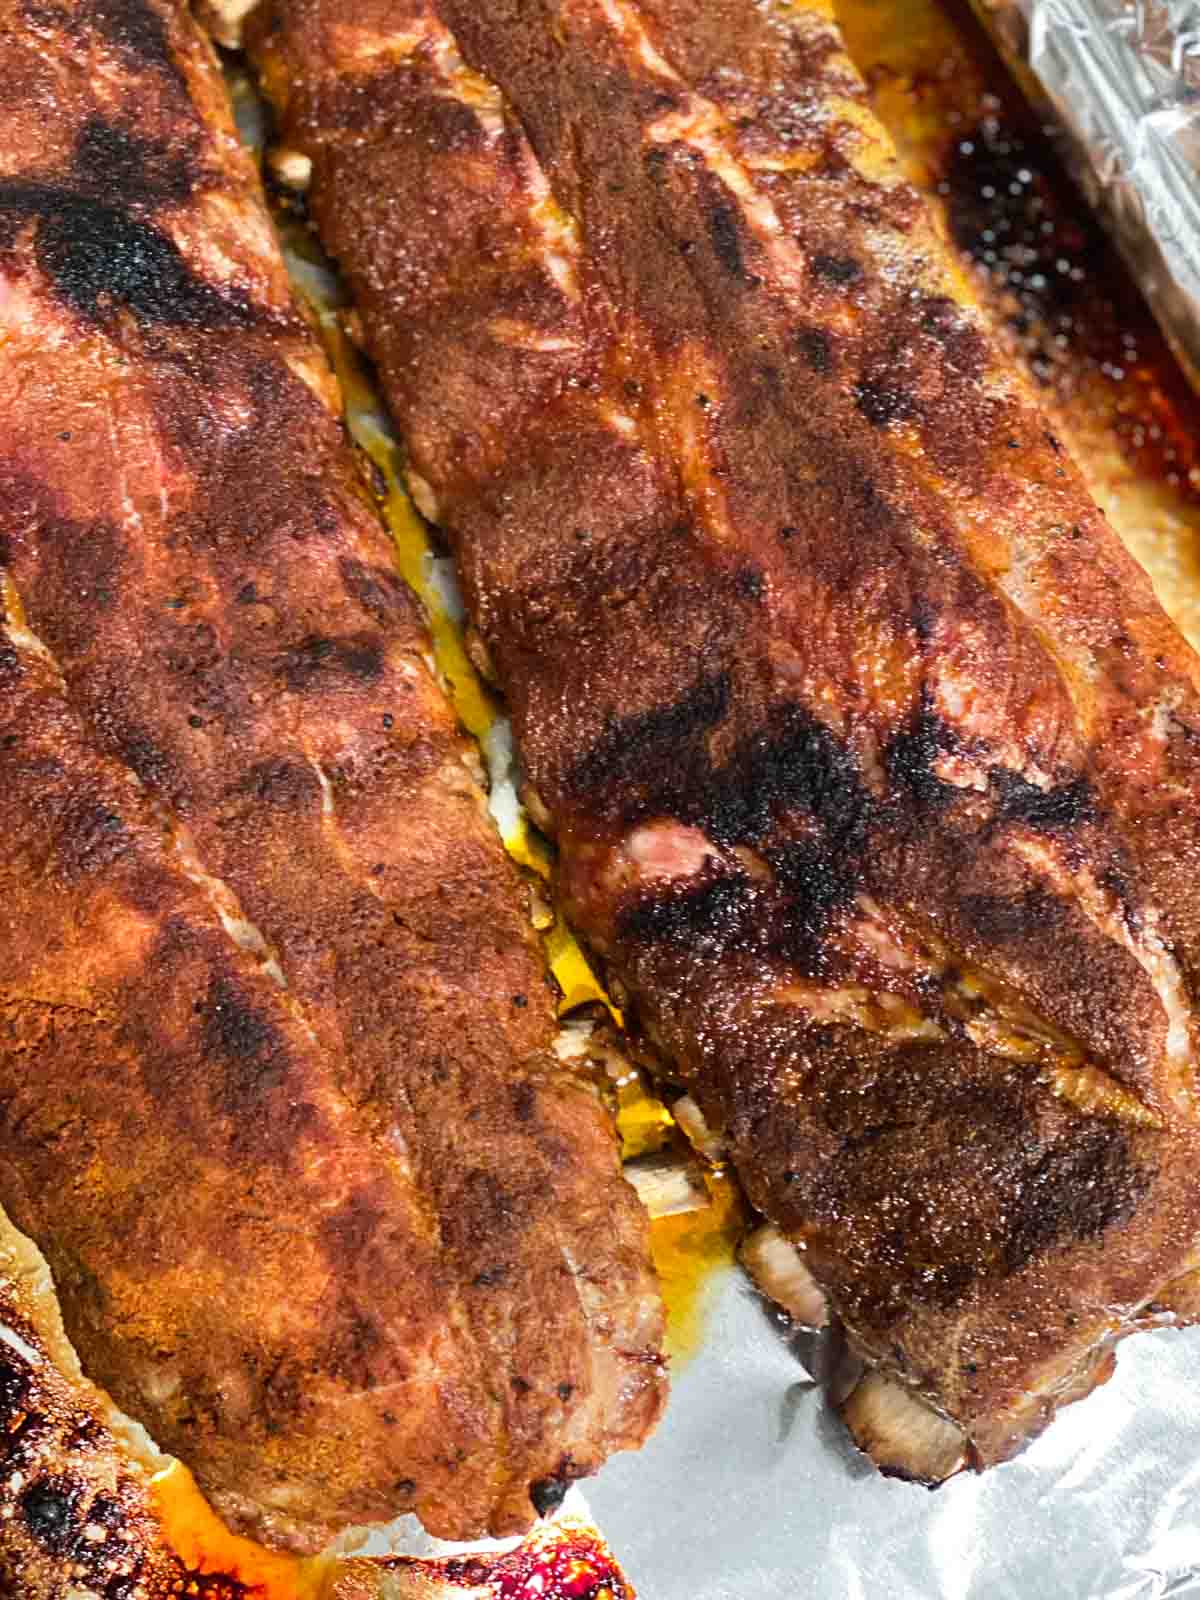 Two racks of ribs after being broiled in the oven